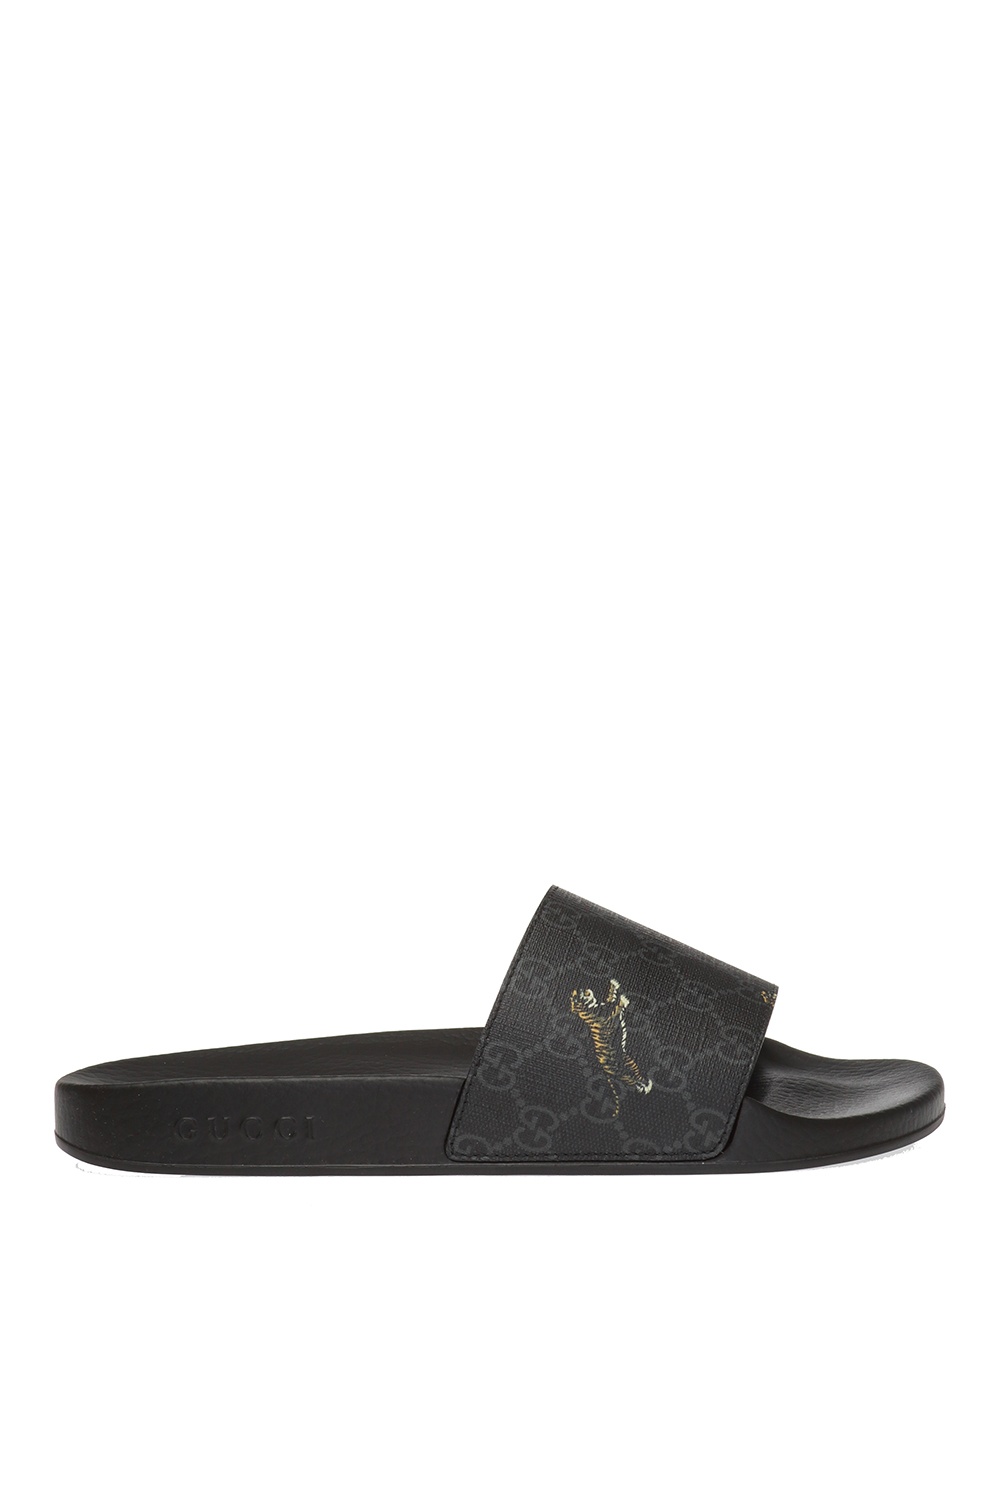 Gucci Logo Mules Flash Sales, UP TO 62% OFF | www.loop-cn.com